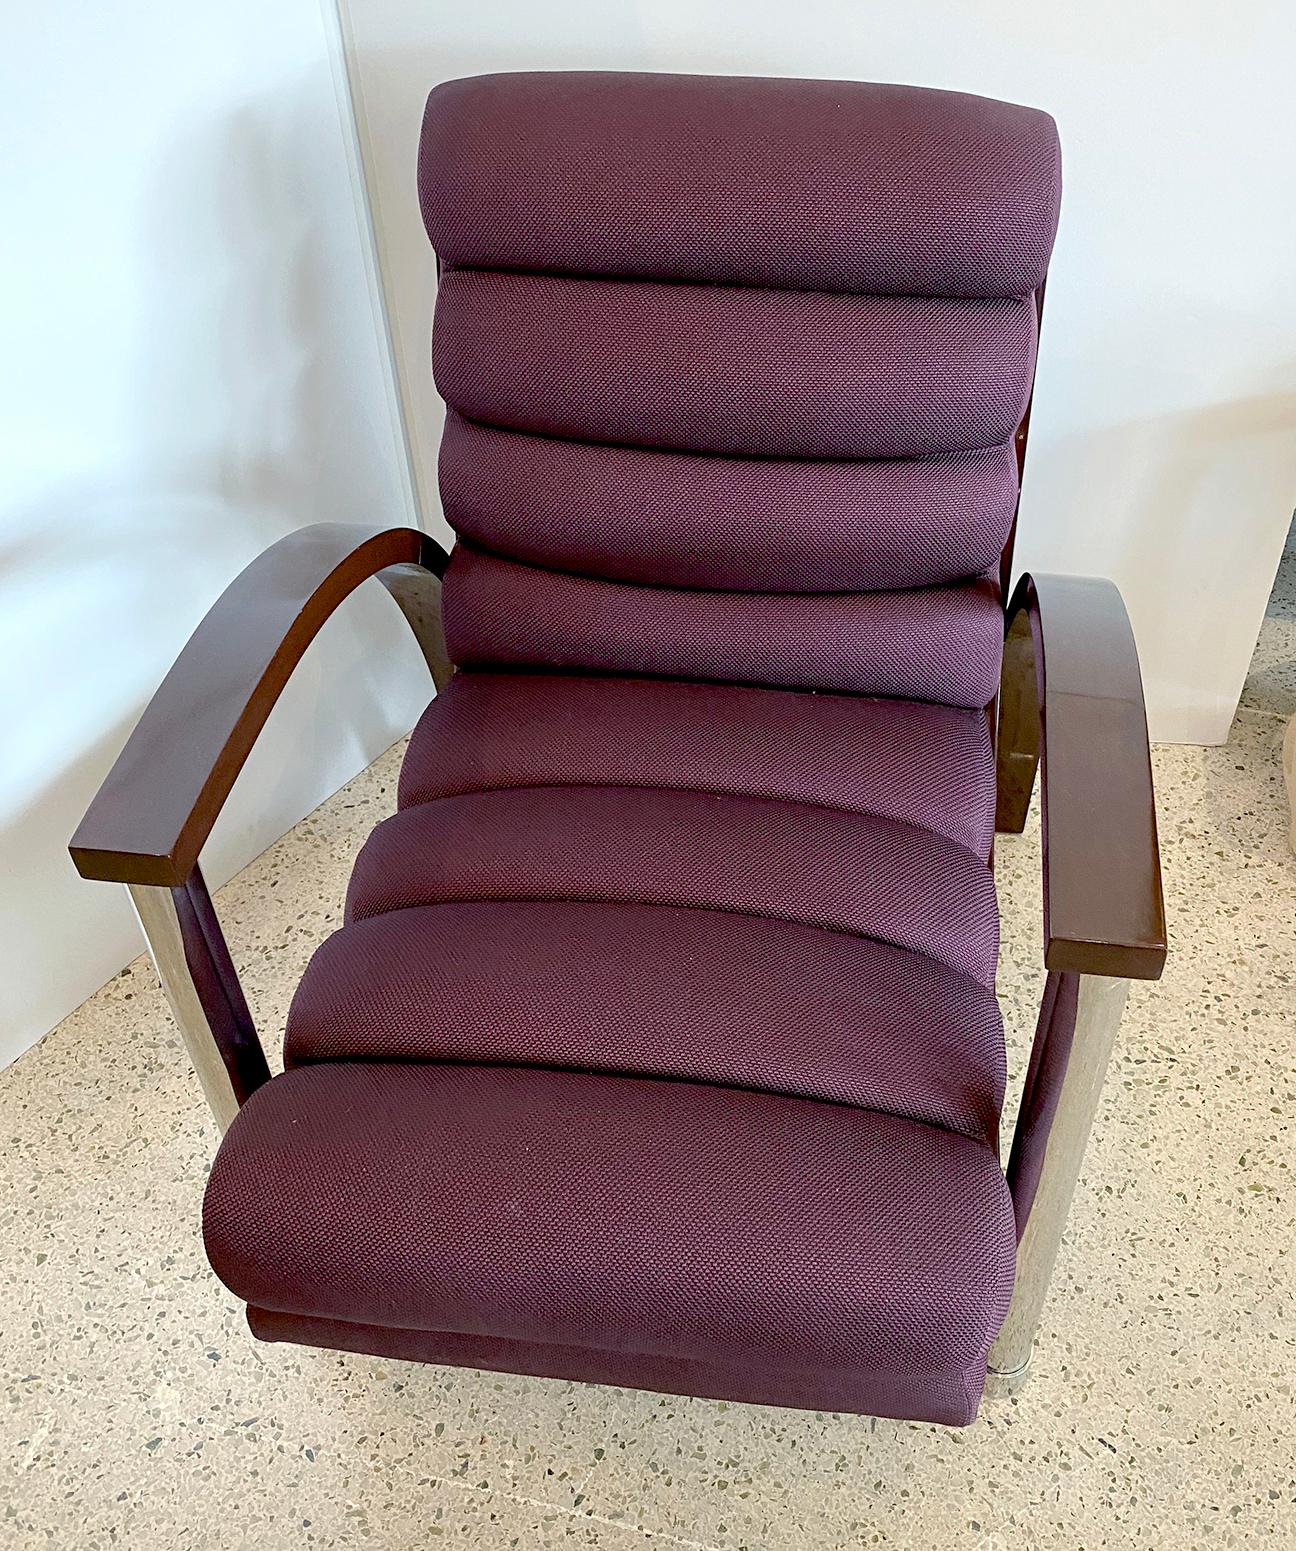 American Modern Dark Oak and Chrome Eclipse Chair Jay Spectre Channeled Upholste In Good Condition For Sale In Hollywood, FL